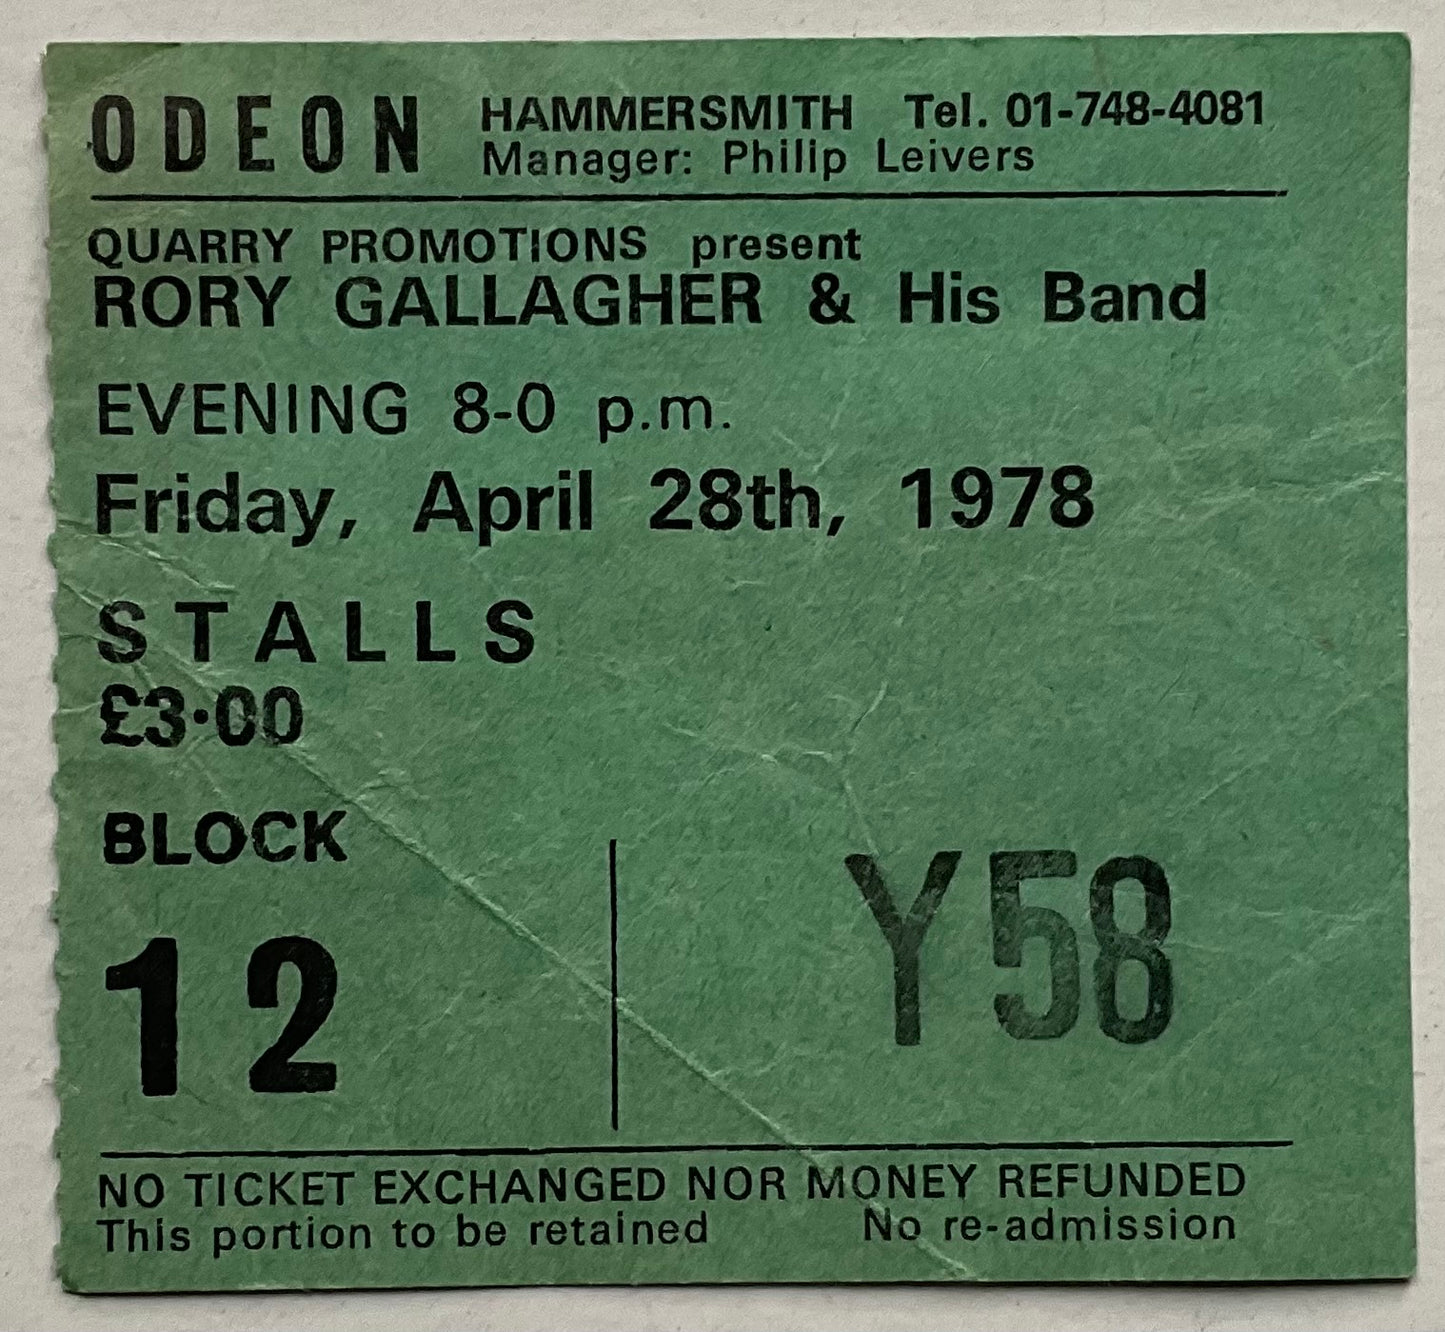 Rory Gallagher Original Concert Ticket Hammersmith Odeon London 28th Apr 1978